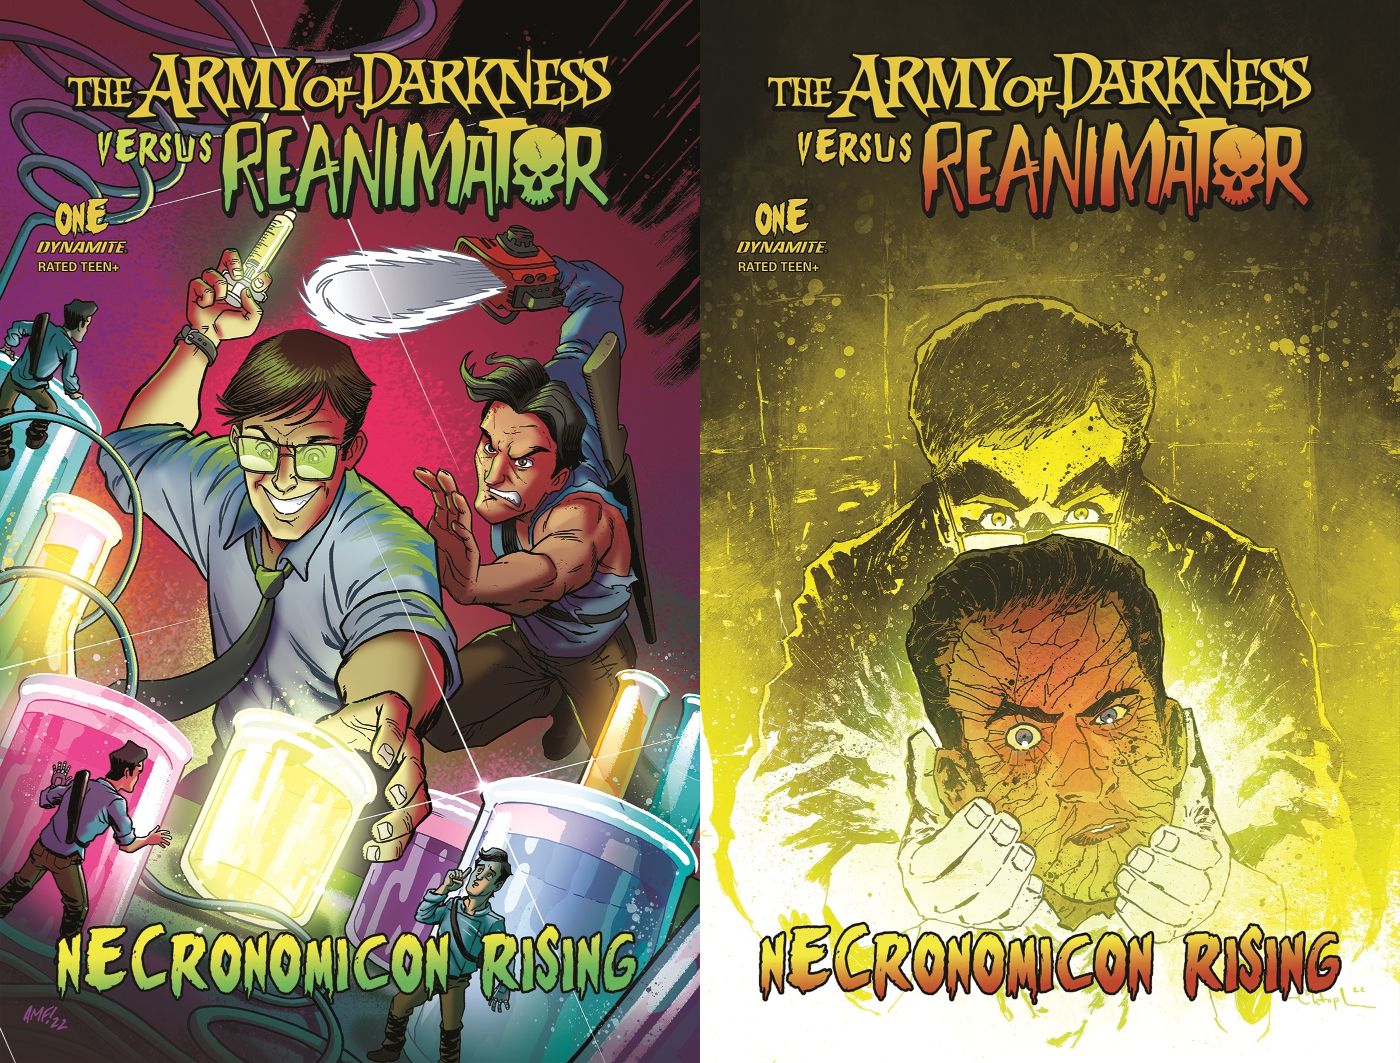 Covers 1 and 2 for Army of Darkness vs. Re-Animator